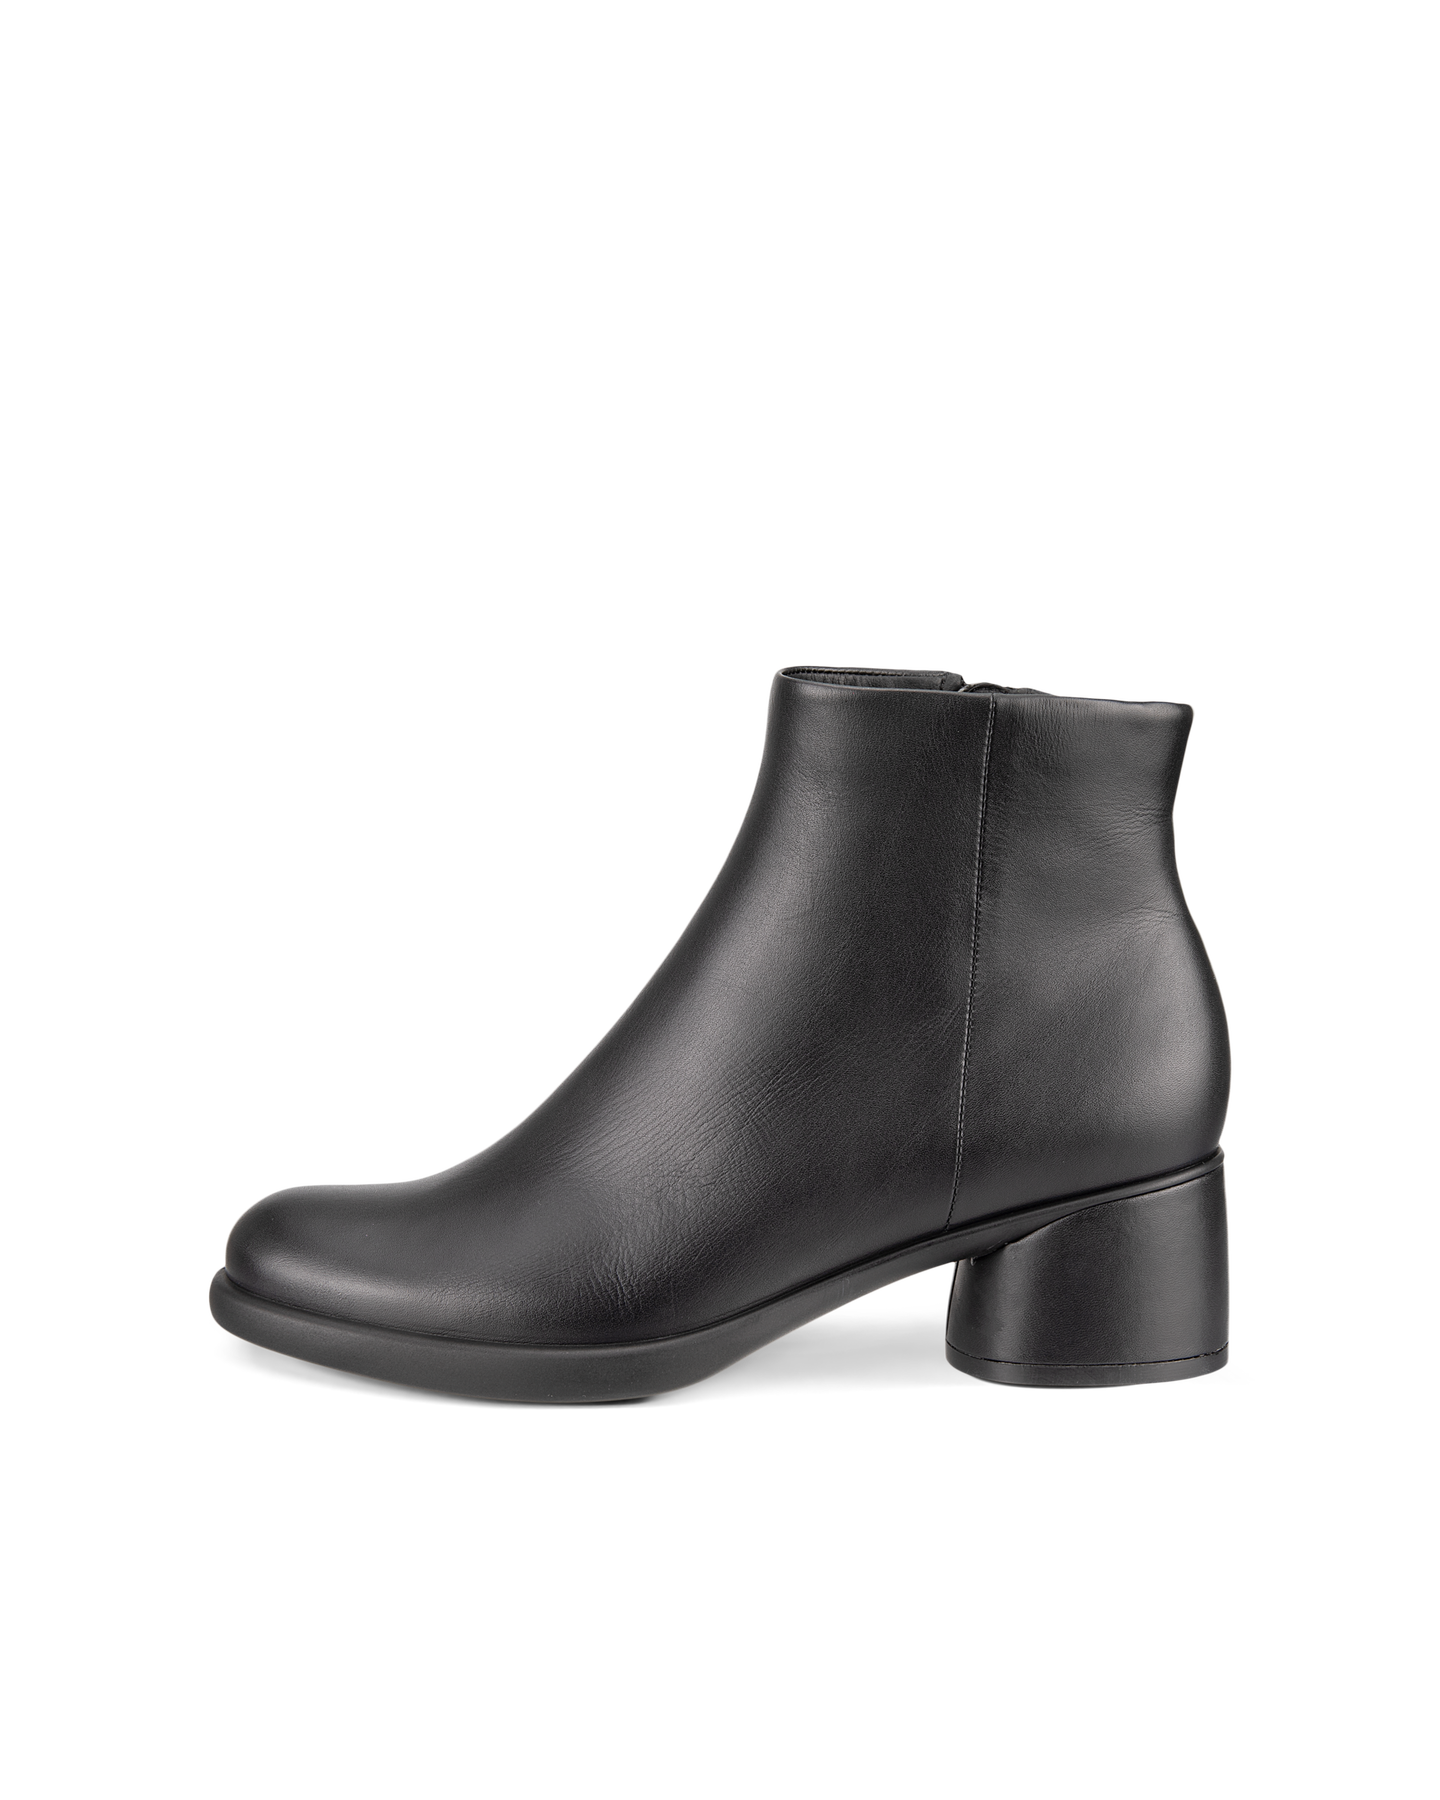 UPC 194891337472 product image for ECCO Women's Sculpted Lx 35 Ankle Boot Size 9 Leather Black | upcitemdb.com